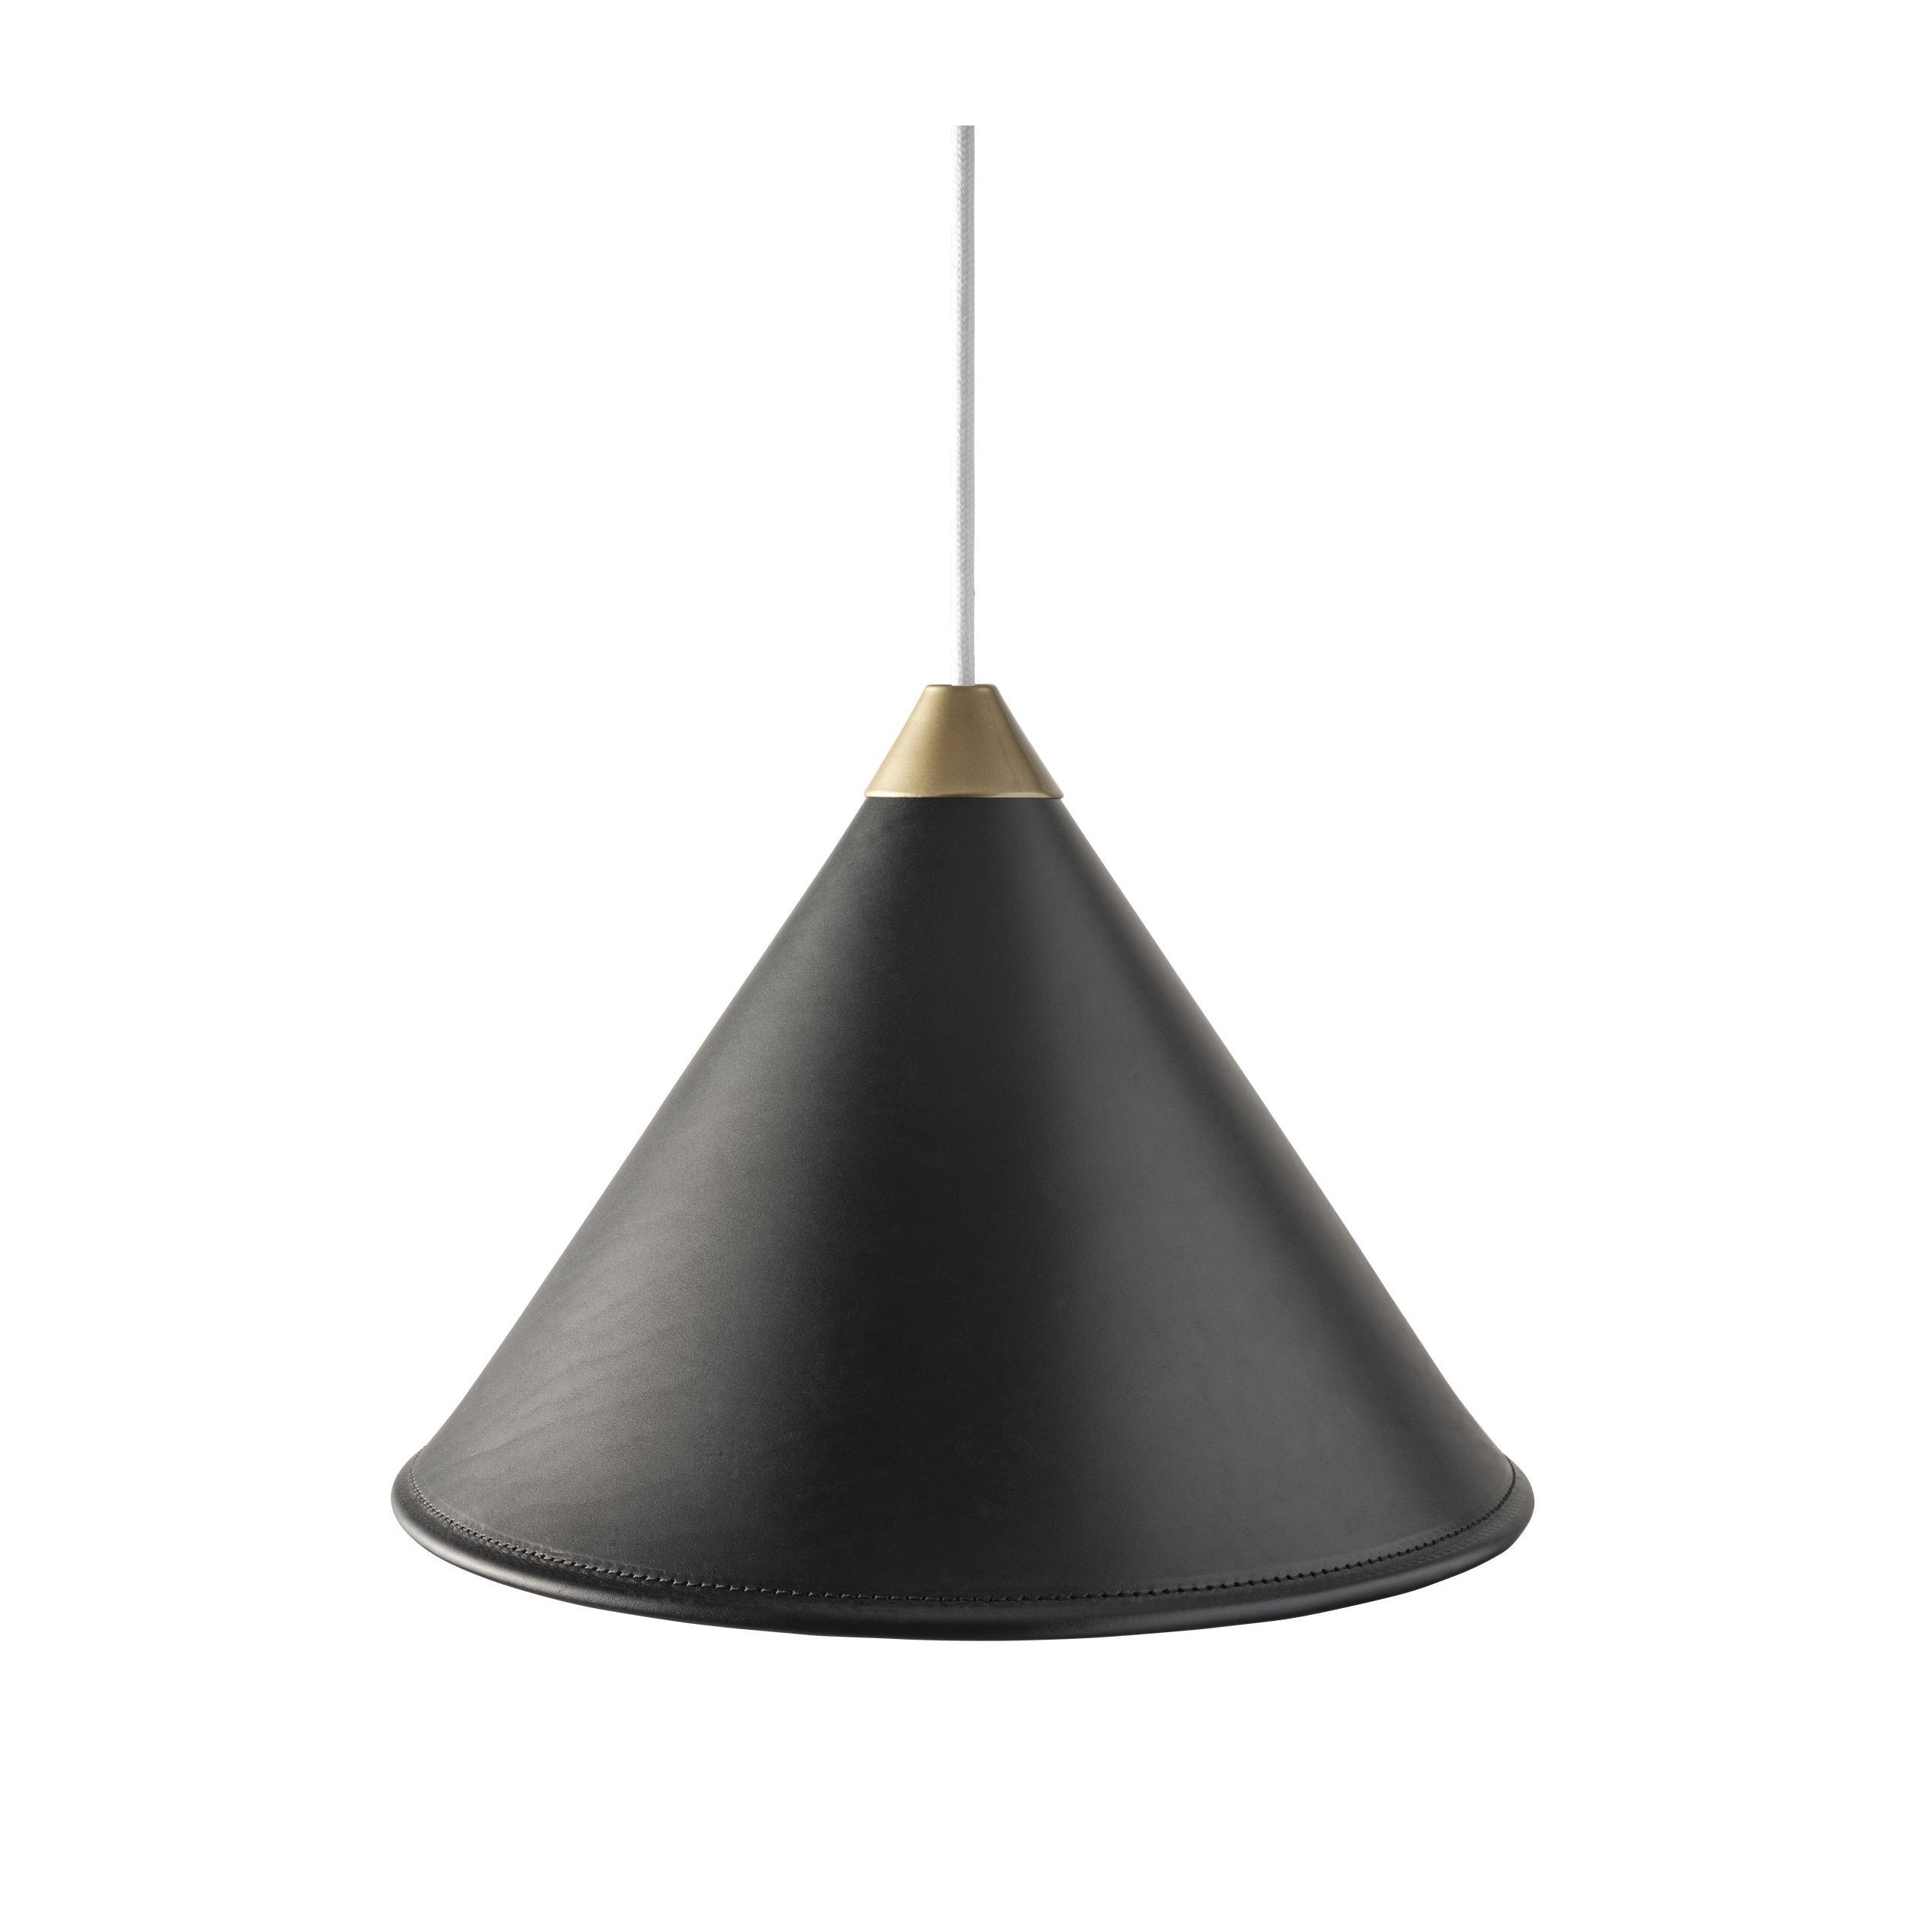 Cuero Namibia Pendant ø 25 Cm, Black/Brass With White Cable